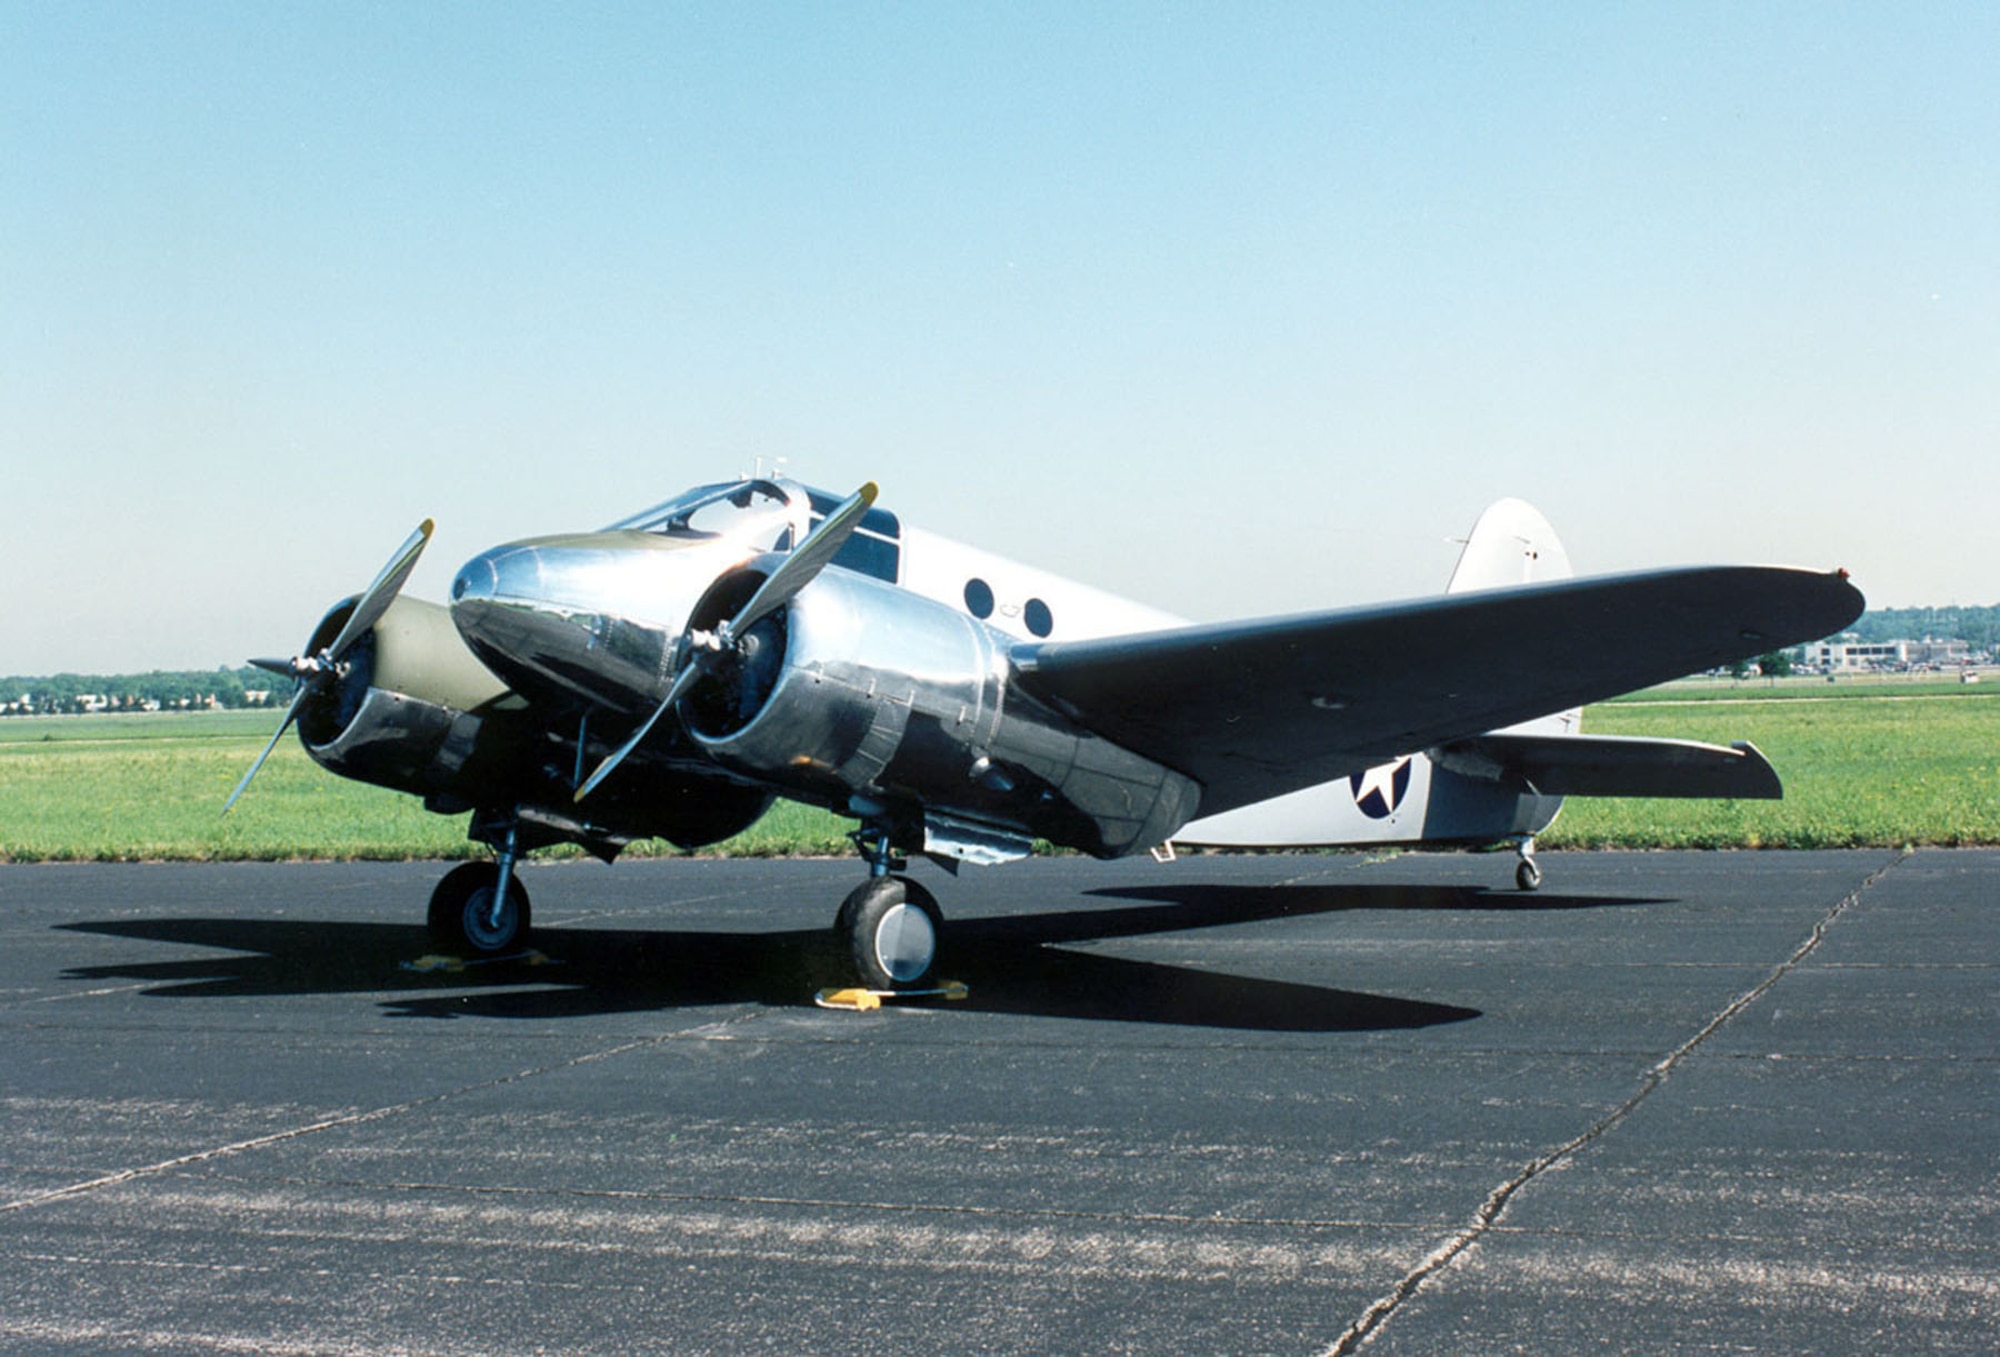 DAYTON, Ohio -- Beech AT-10 Wichita at the National Museum of the United States Air Force. (U.S. Air Force photo)